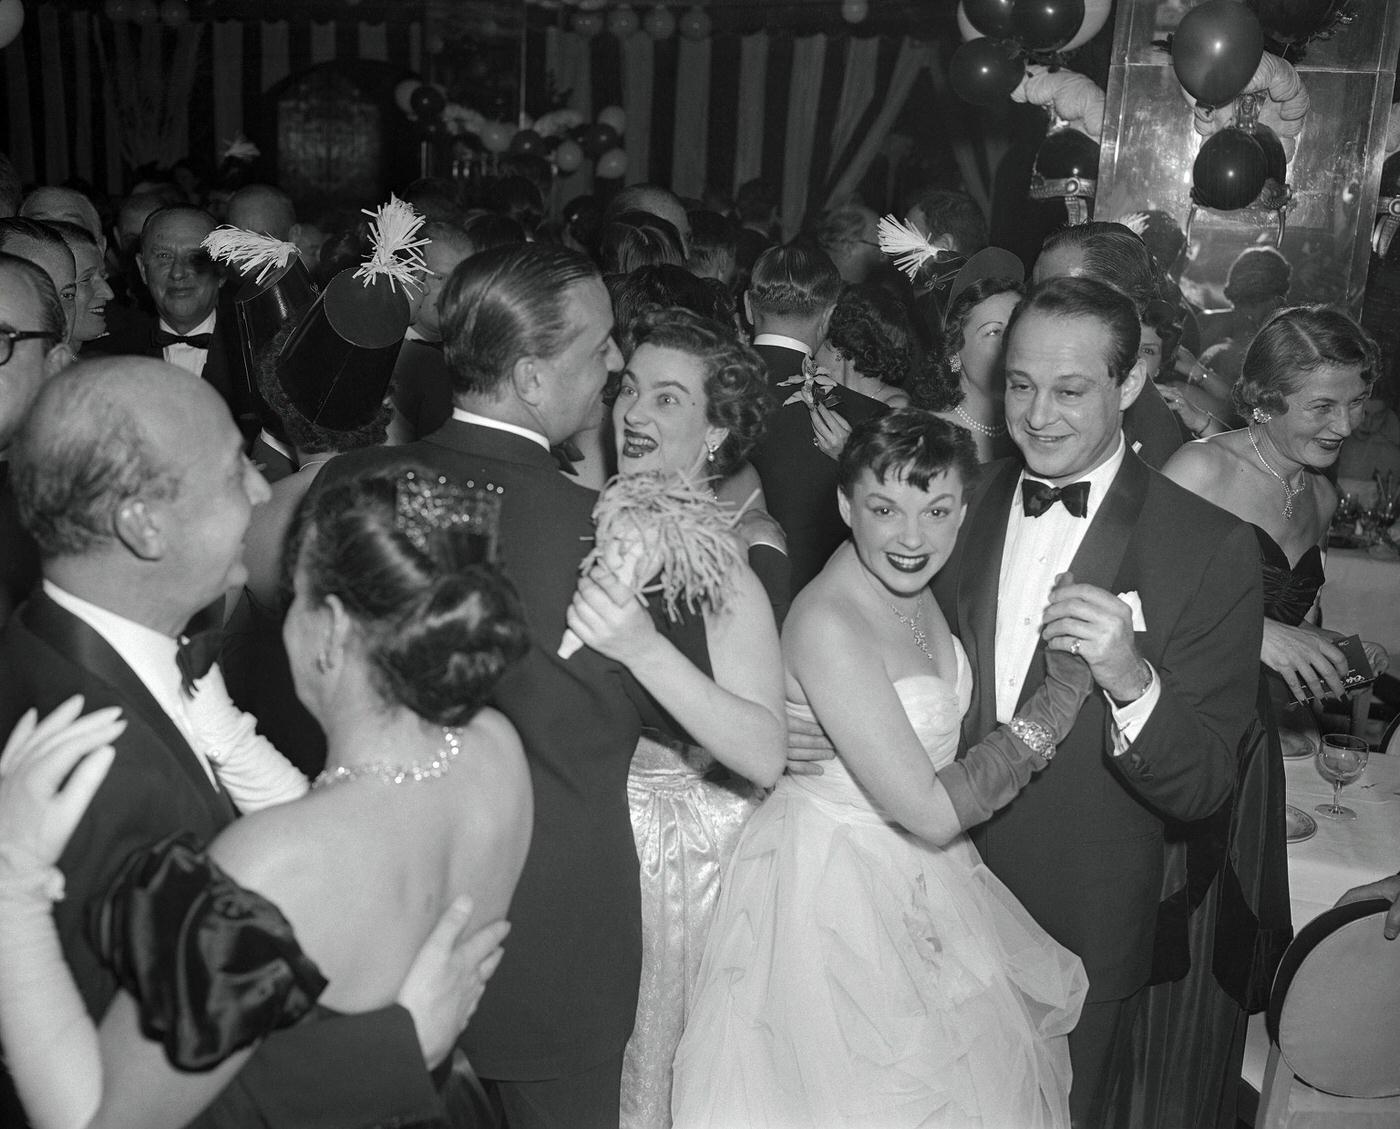 Judy Garland is shown here dancing with Sidney Luft at the Sherry Netherlands Hotel.